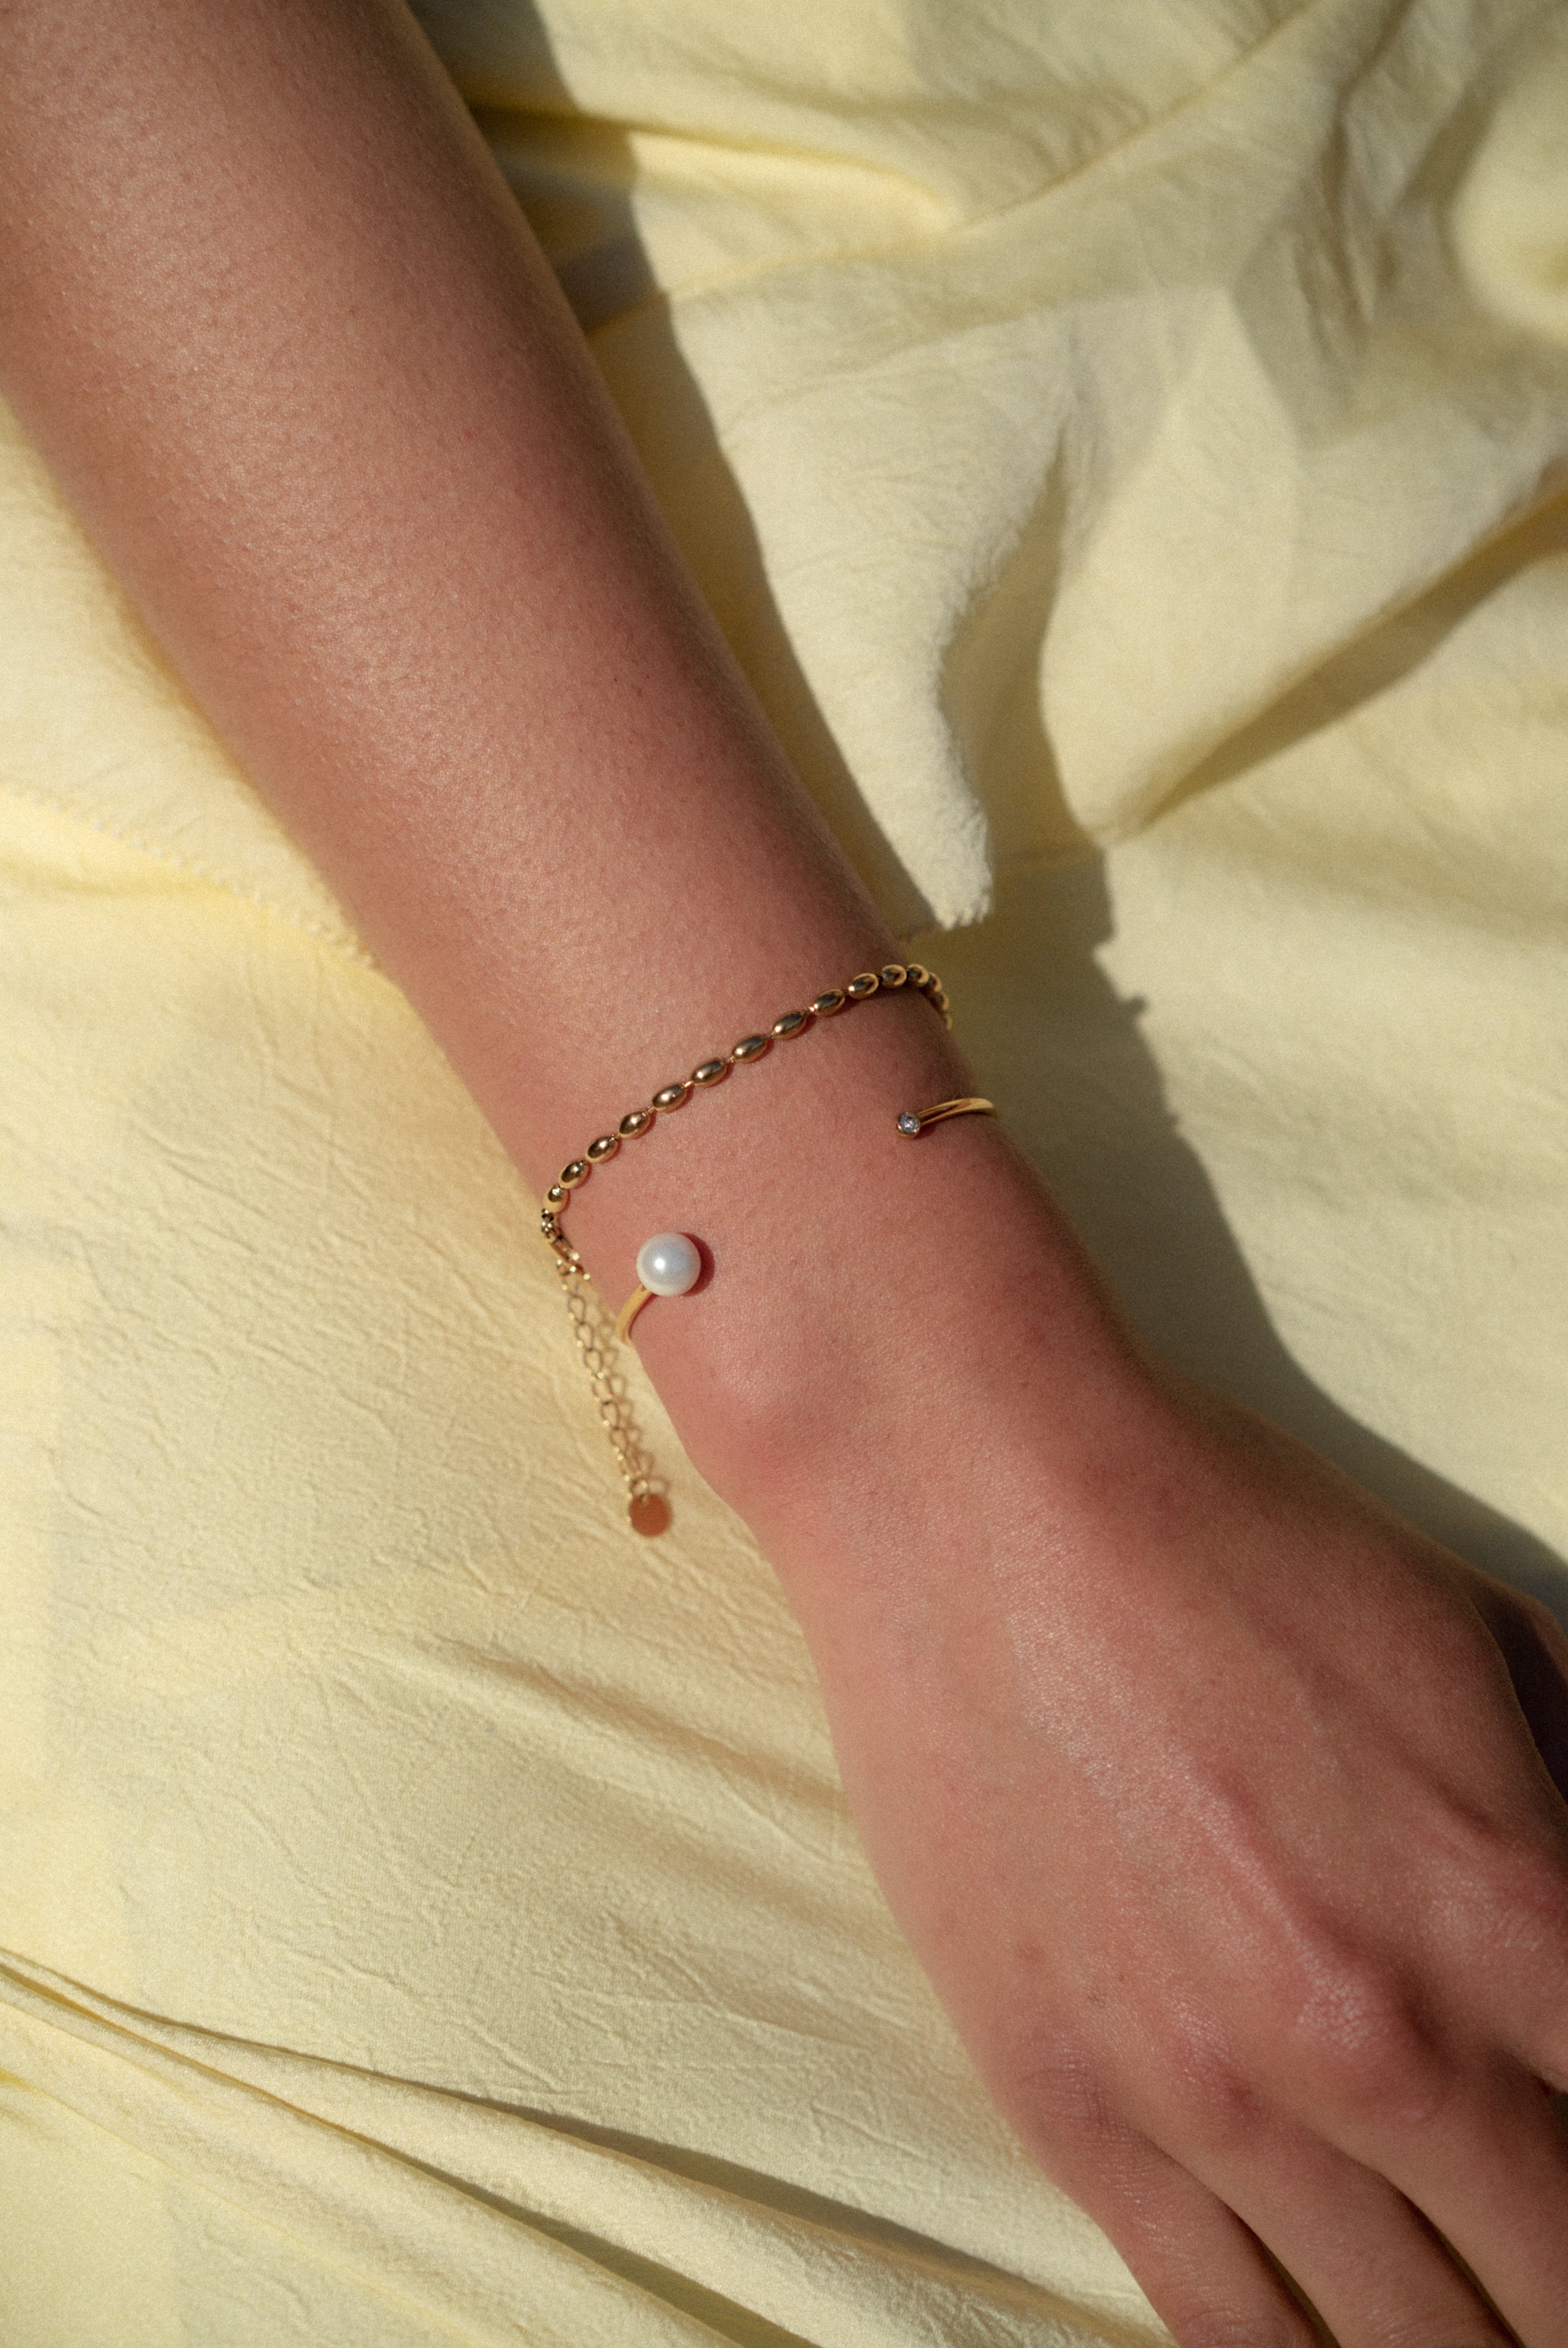 Make a striking statement with our exquisite Cuff Bracelet, designed to adorn your wrist with a captivating fusion of modernity and timeless charm.  18K gold plated on stainless steel. All the bracelets come in a beautiful jewelry pouch.